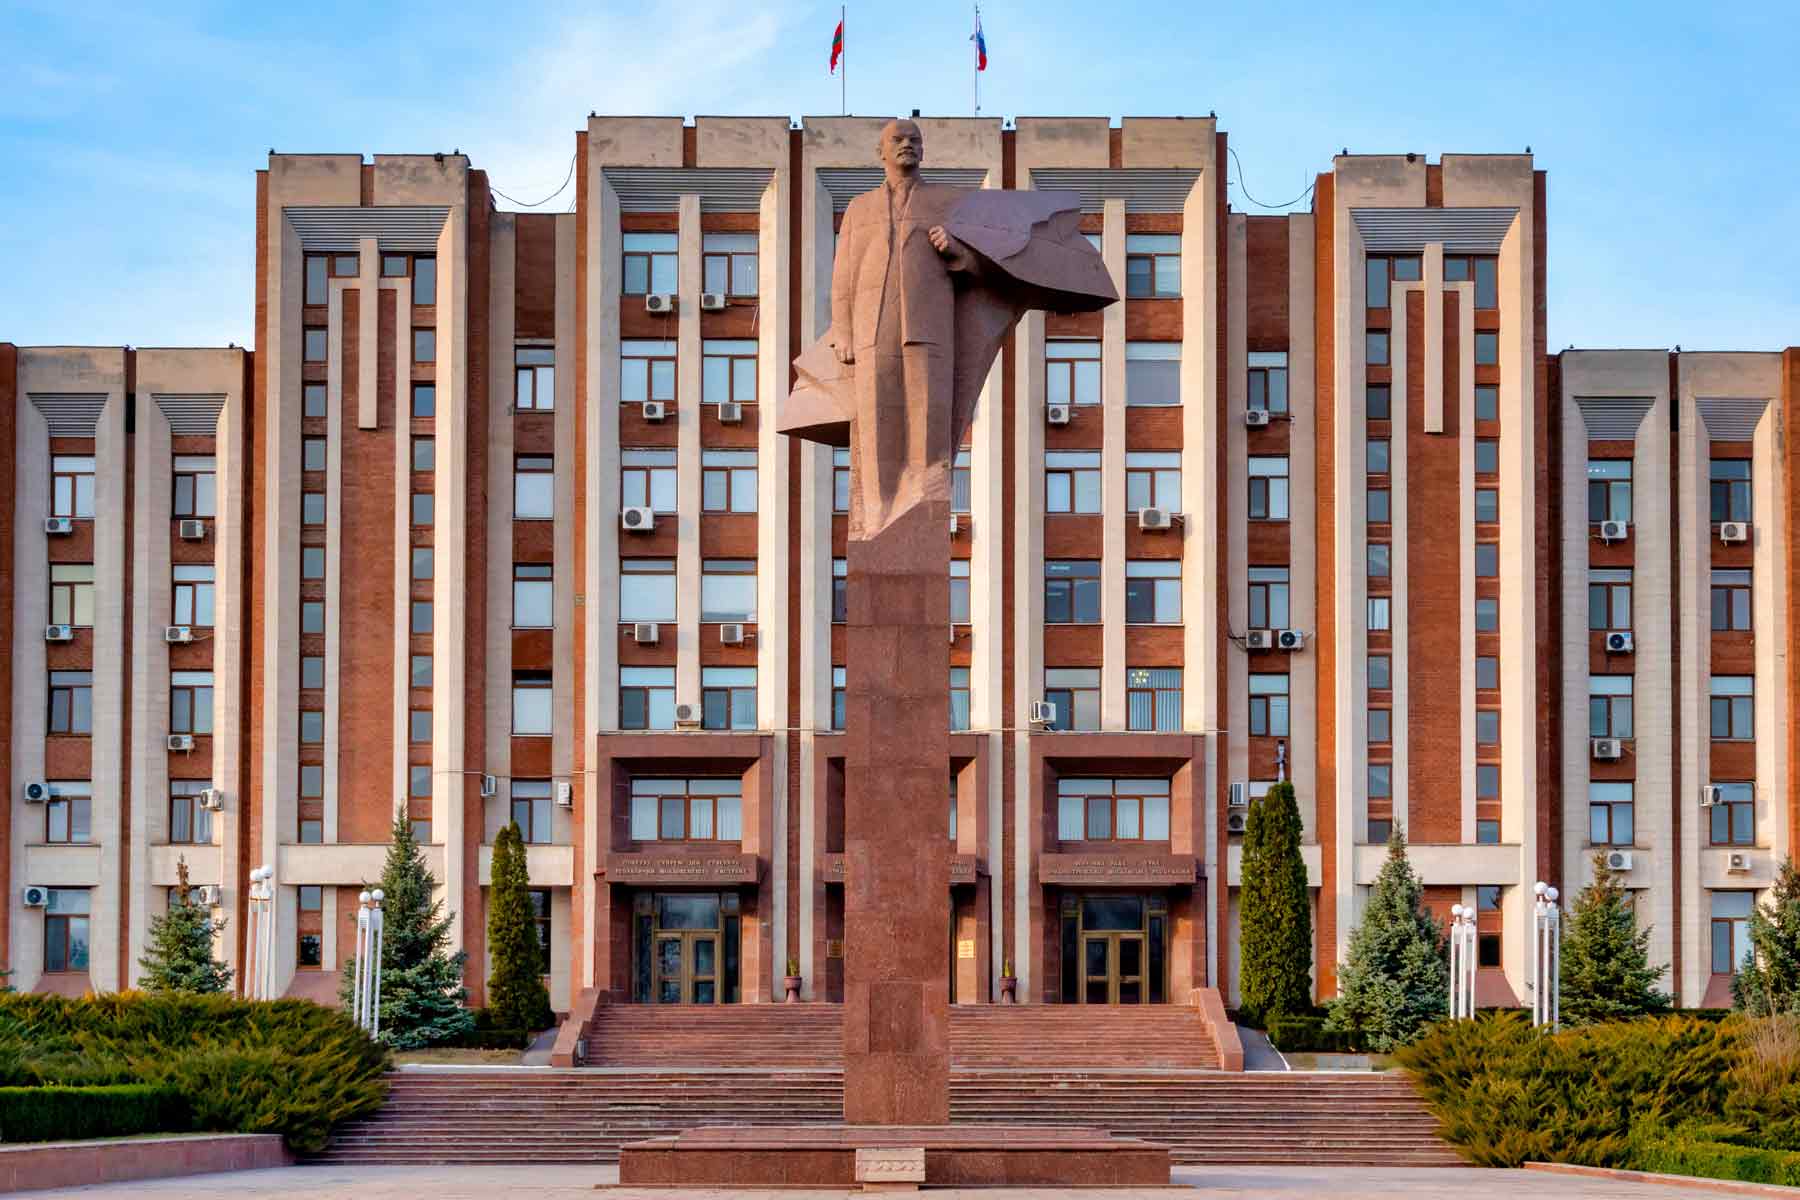 Statue of Lenin in front of the parliament building in Tiraspol